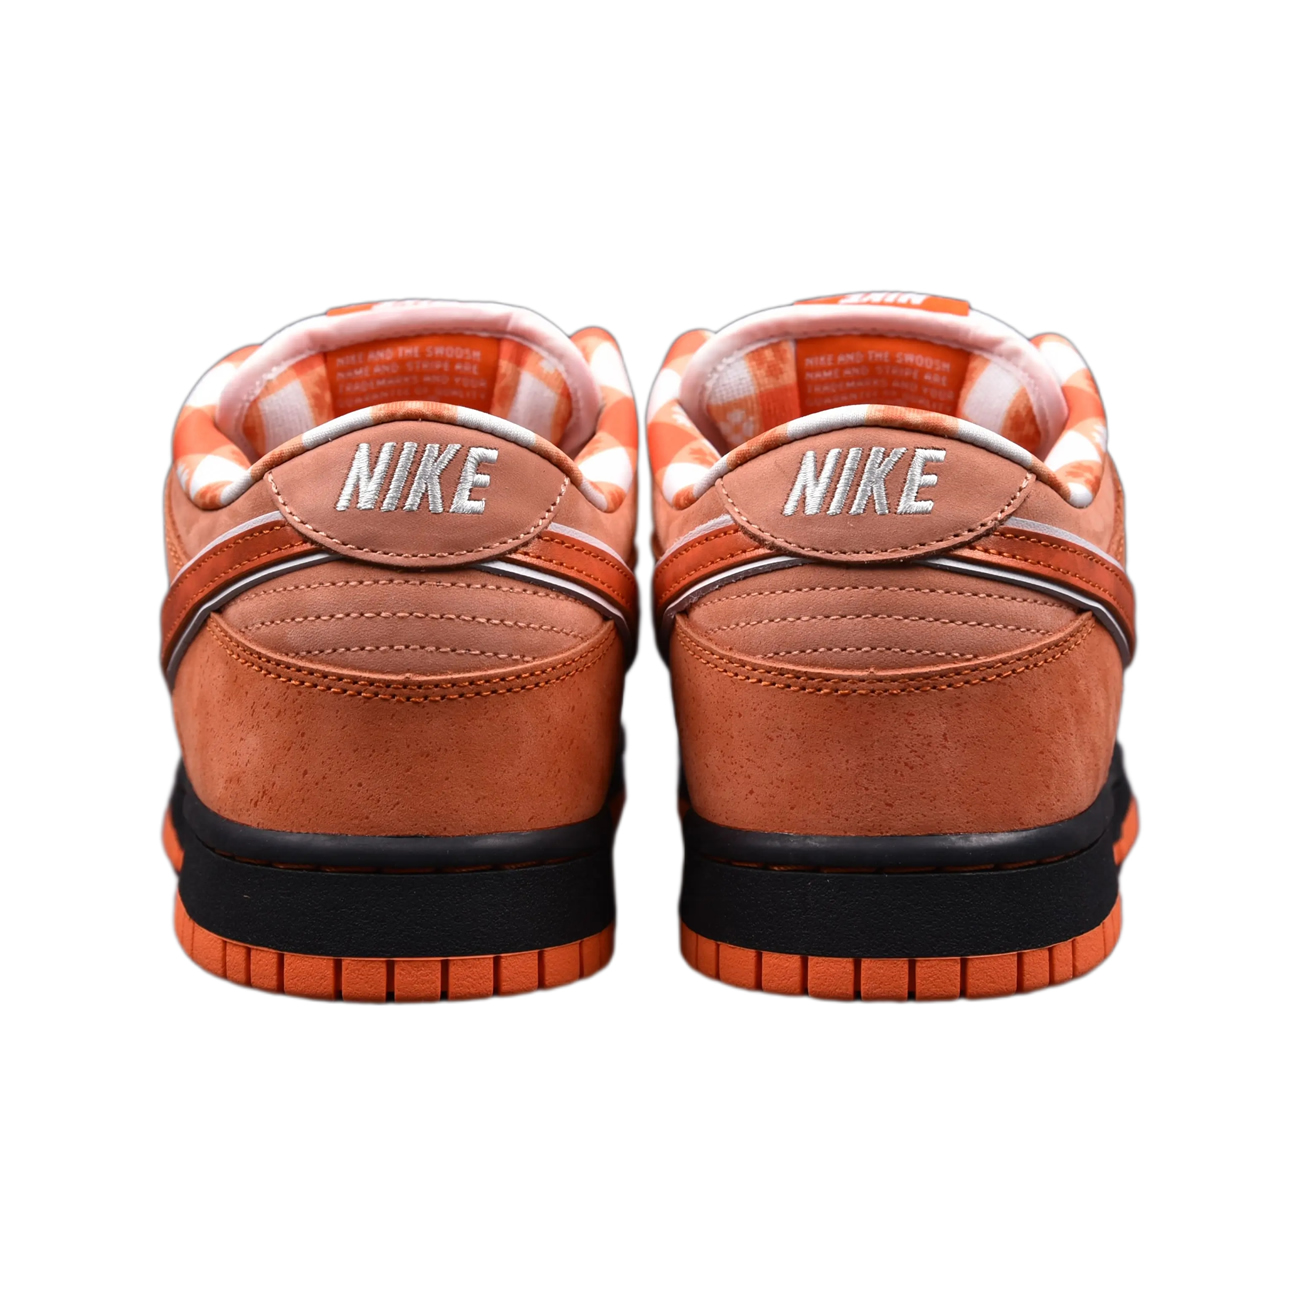 Nike Sb Dunk Low Concepts Red Lobster Fd8776 800 (58) - newkick.org